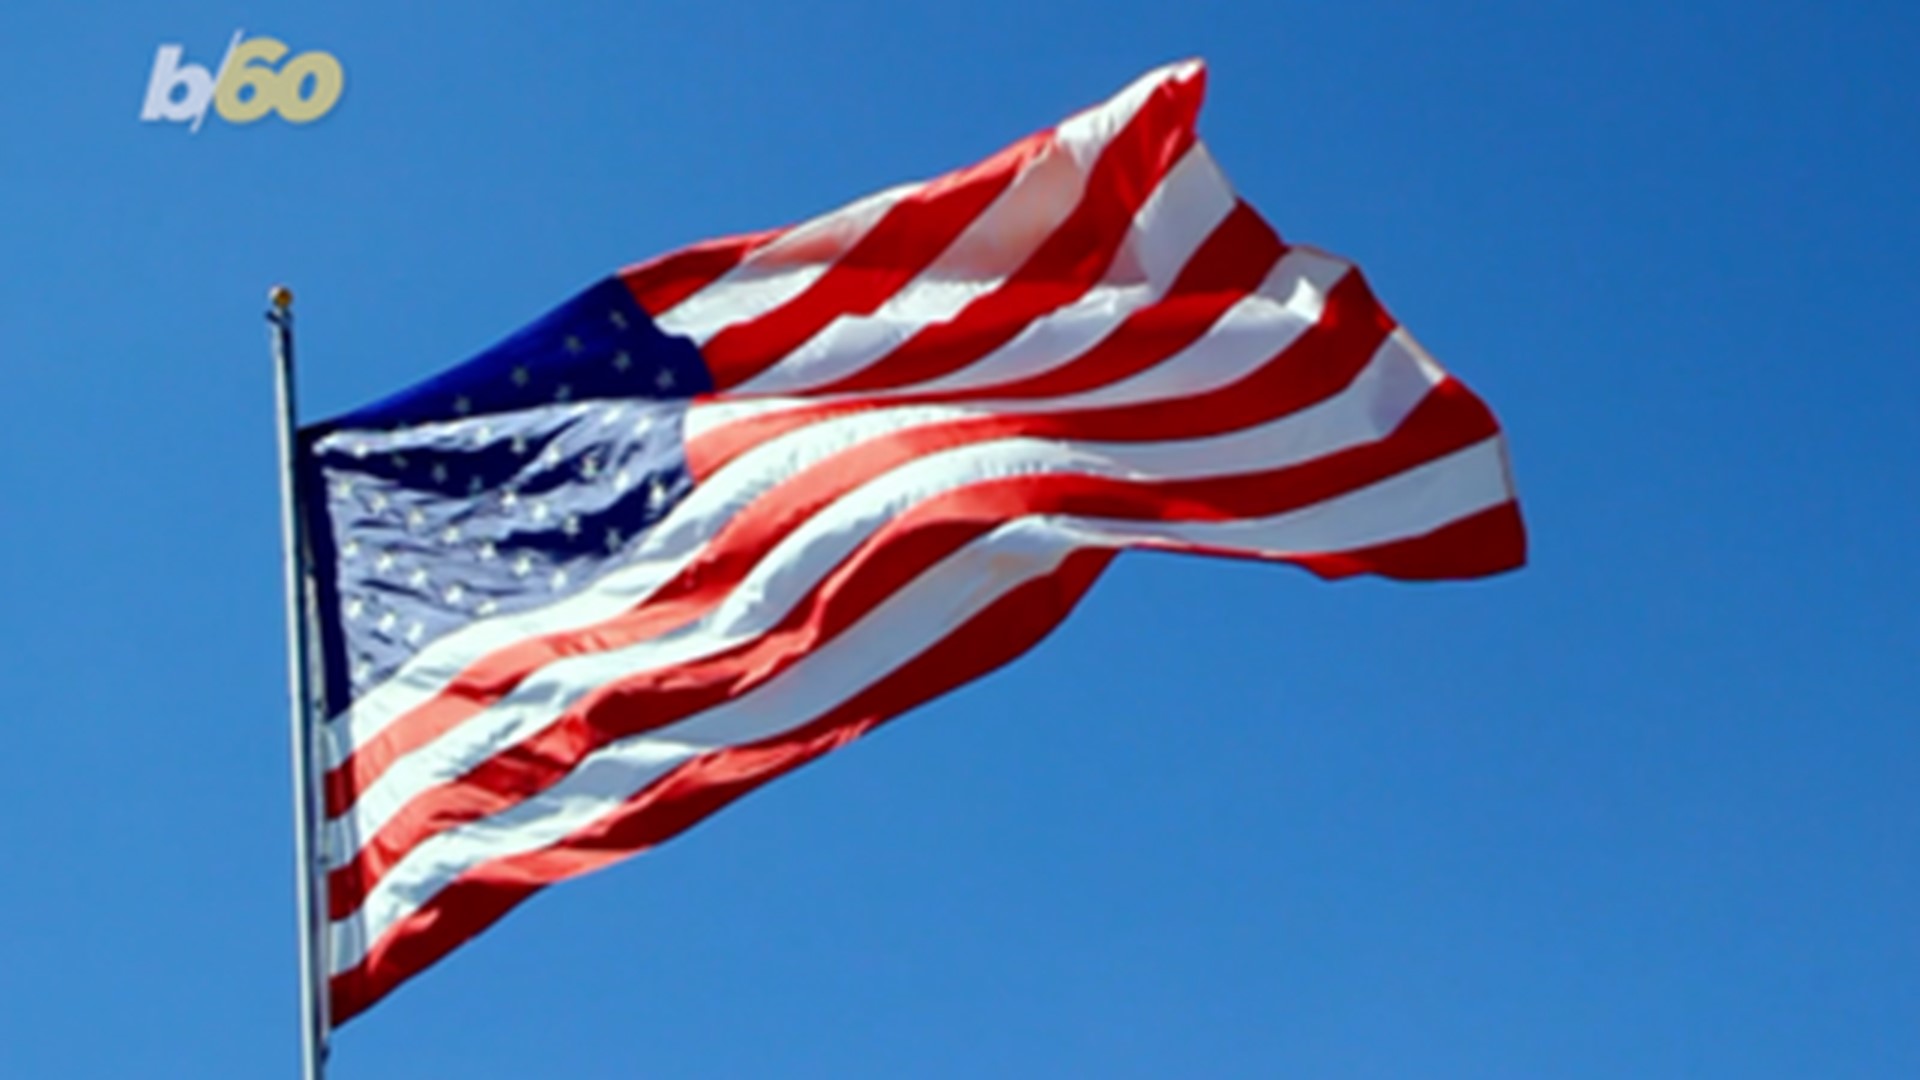 It's great to show your pride by displaying the American flag, but to do it properly, the long list of rules to follow could have you feeling red, white and blue in the face. Buzz60's Sean Dowling has more.